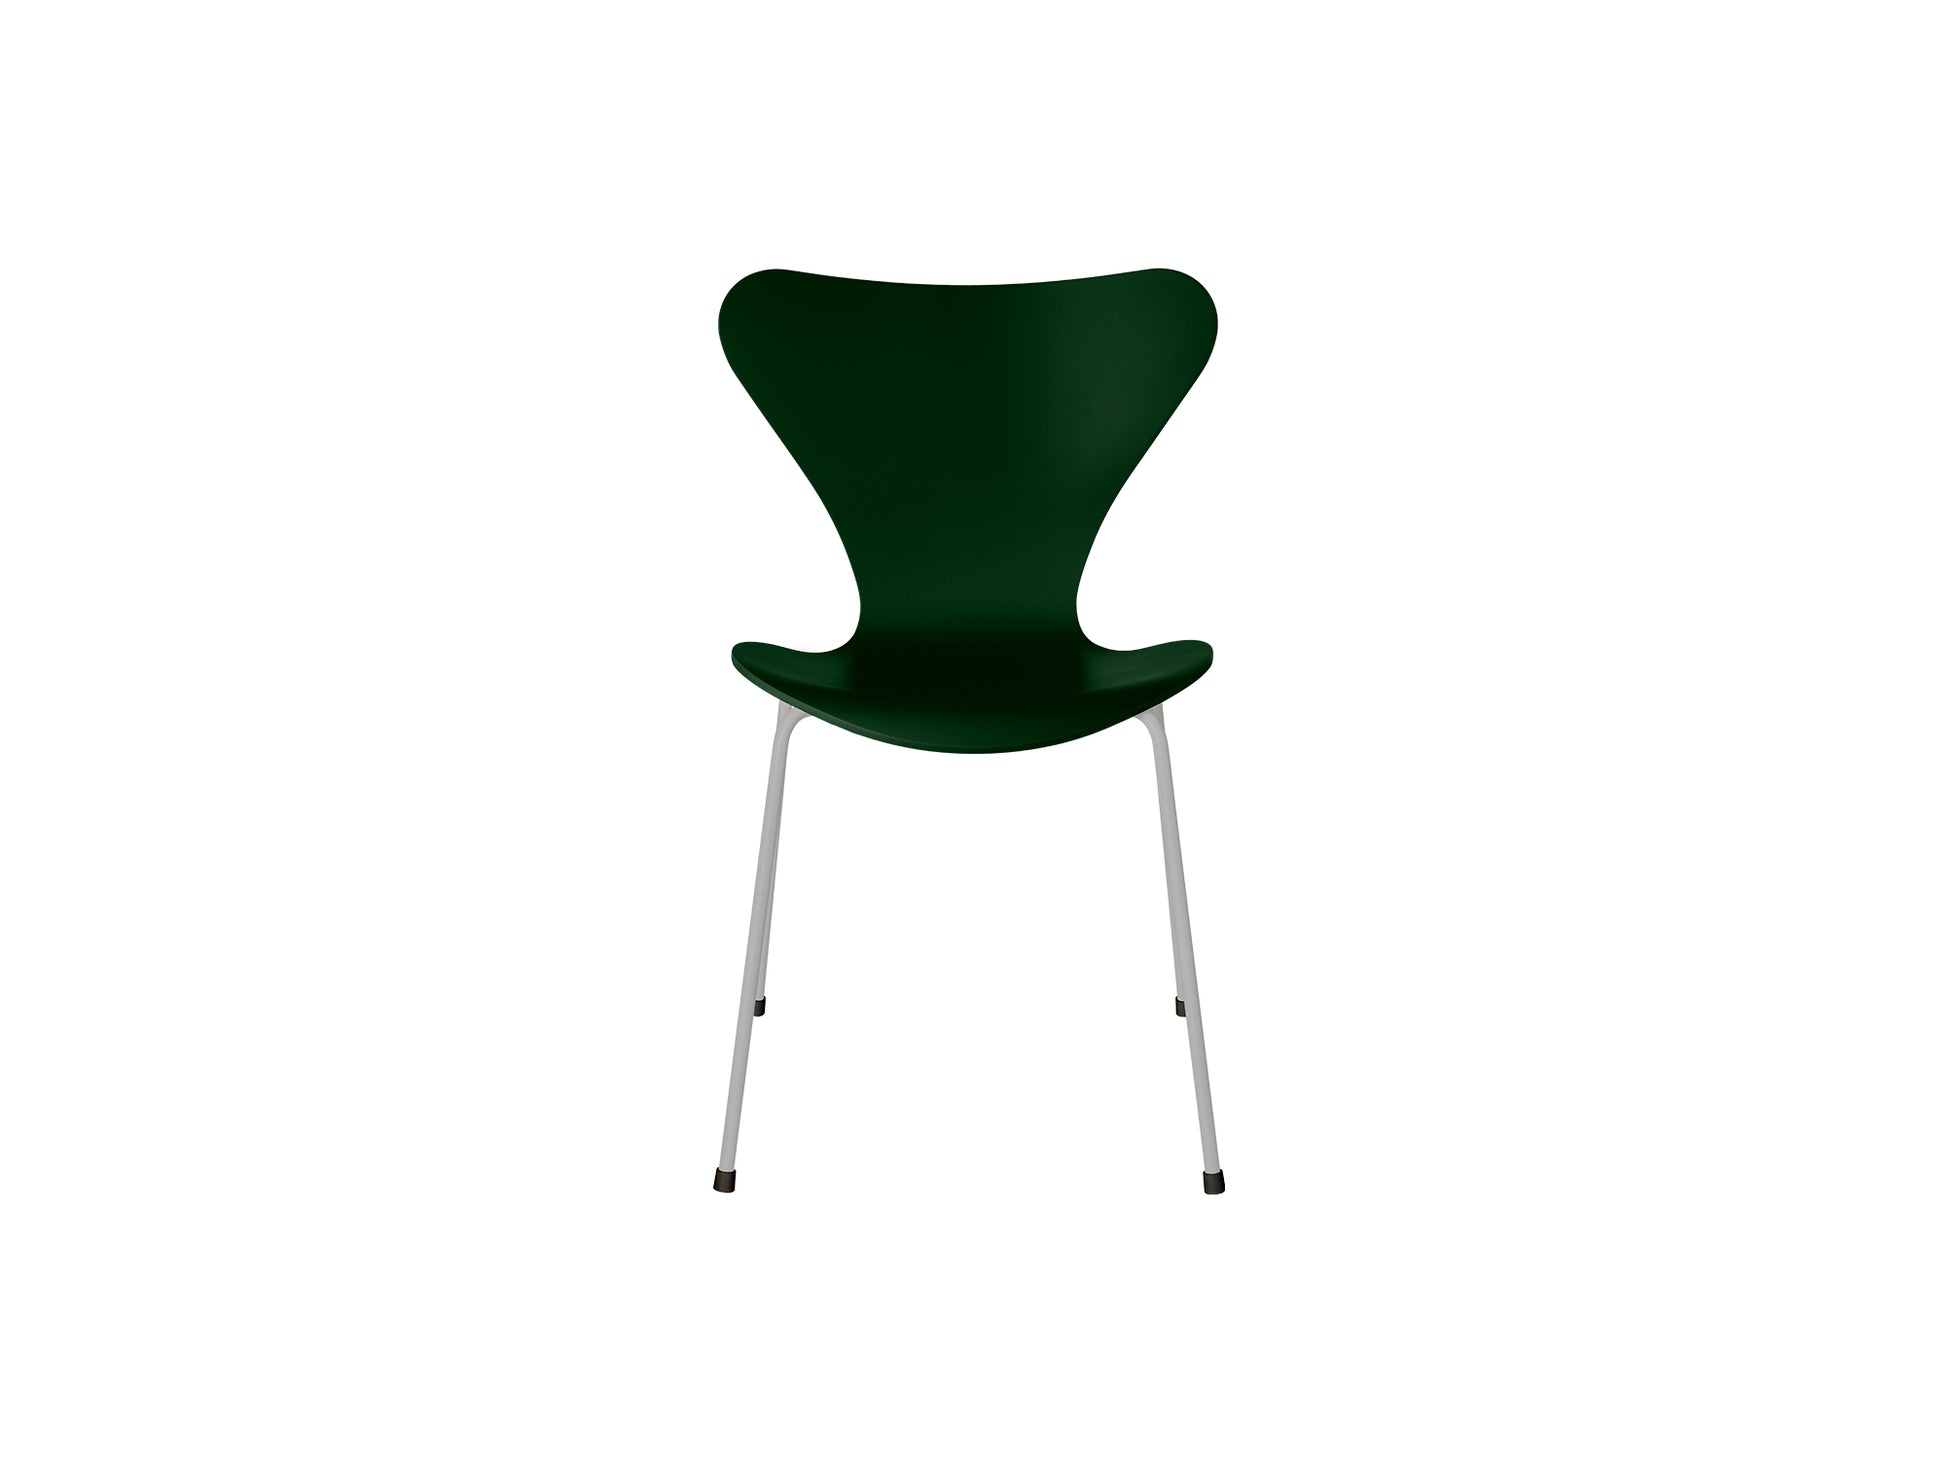 Series 7™ 3107 Dining Chair by Fritz Hansen - Evergreen Lacquered Veneer Shell / Nine Grey Steel